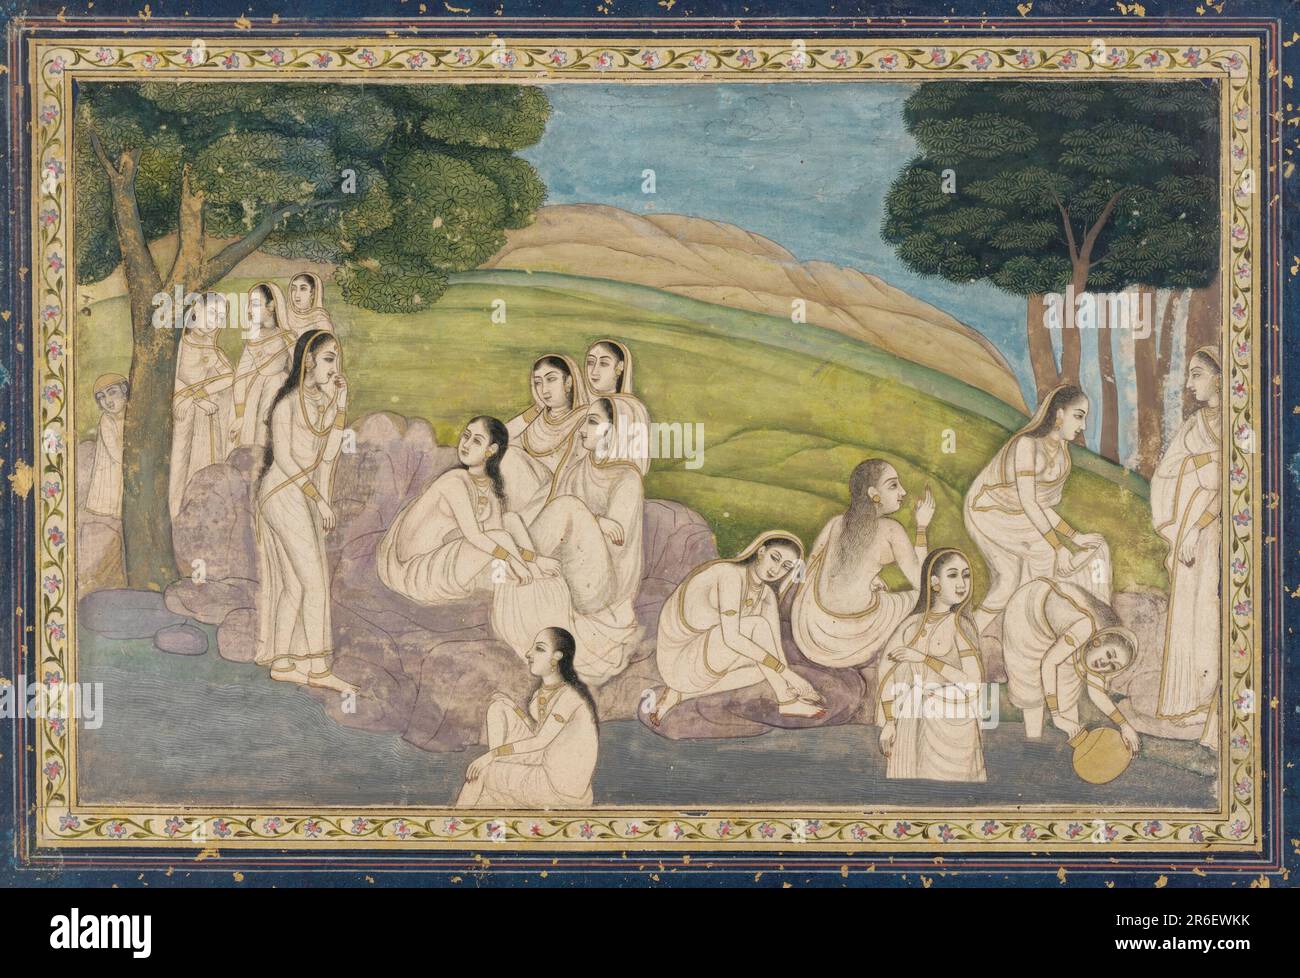 A group of women, bathing. Date: 18th century. Origin: India. Period: Mughal dynasty. Color and gold on paper. Museum: Freer Gallery of Art and Arthur M. Sackler Gallery. Stock Photo